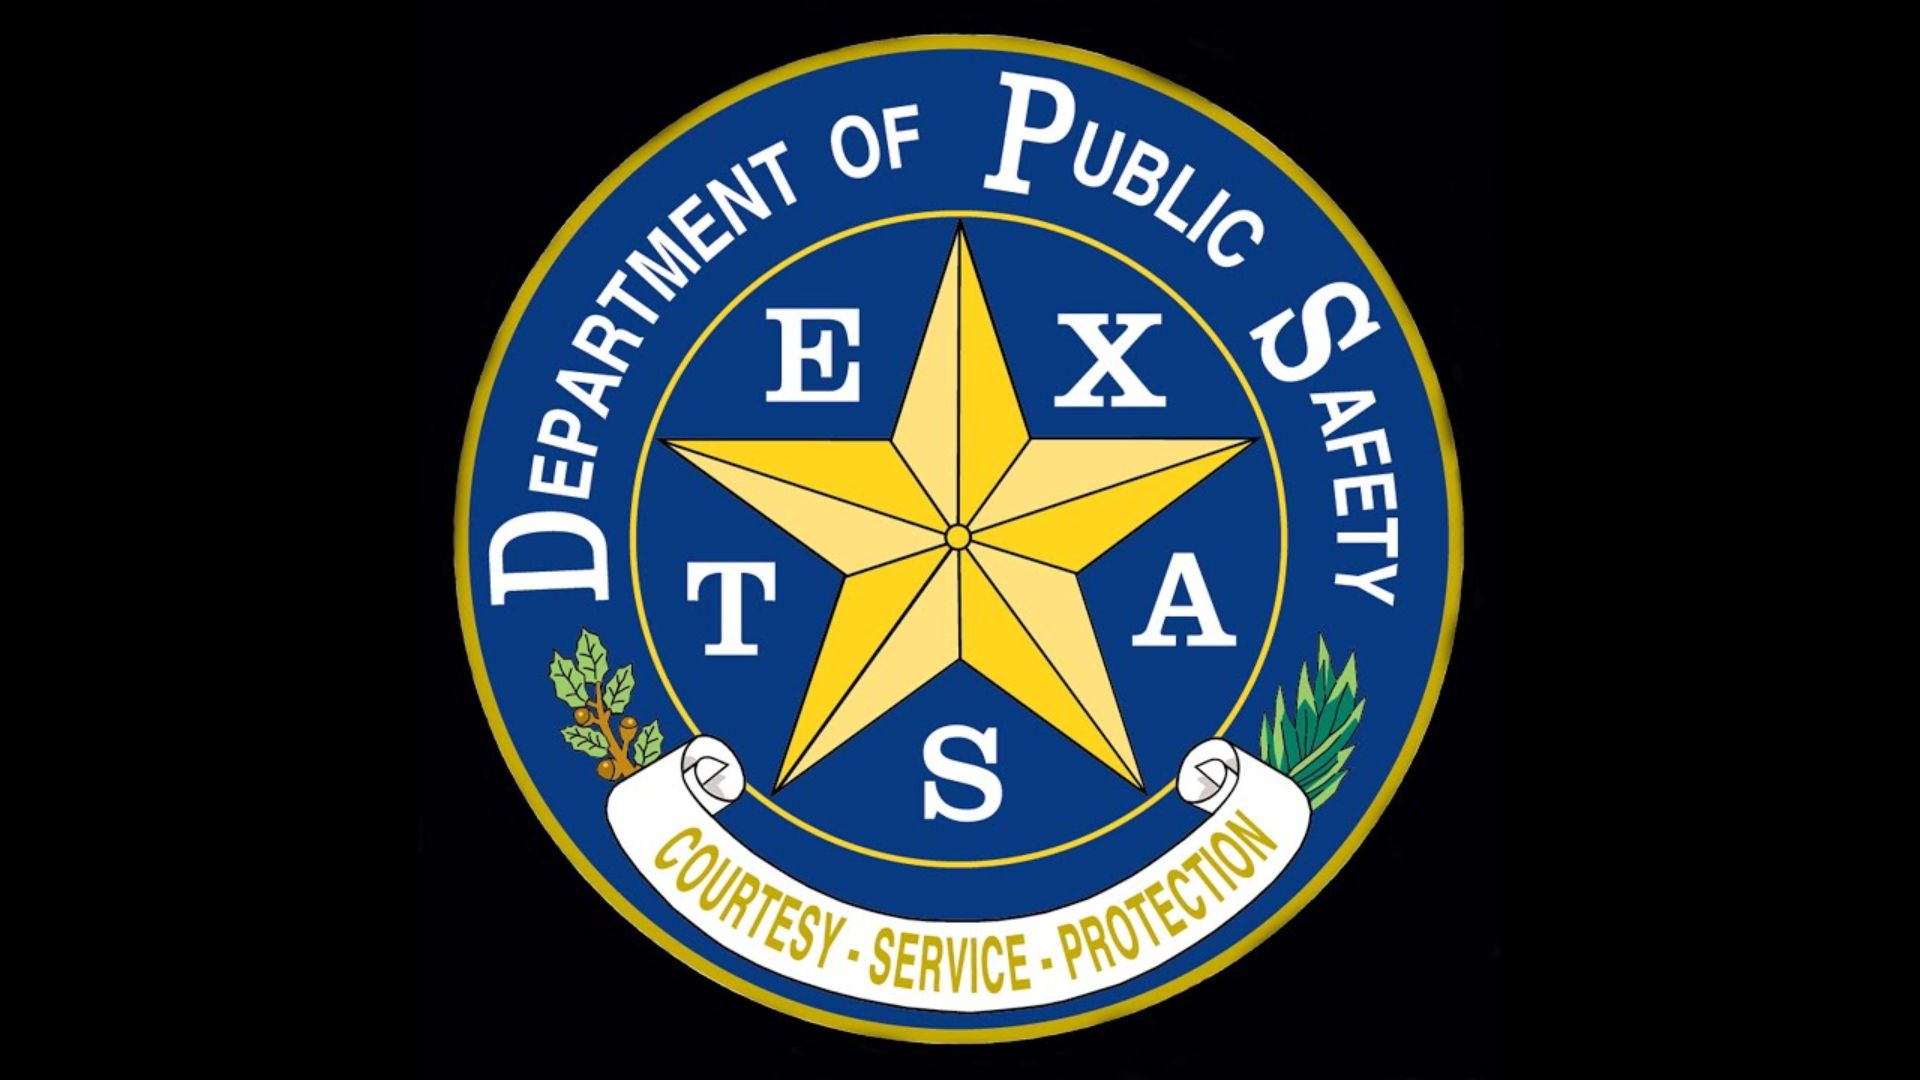 Changes are coming at the Texas Department of Public Safety in Austin